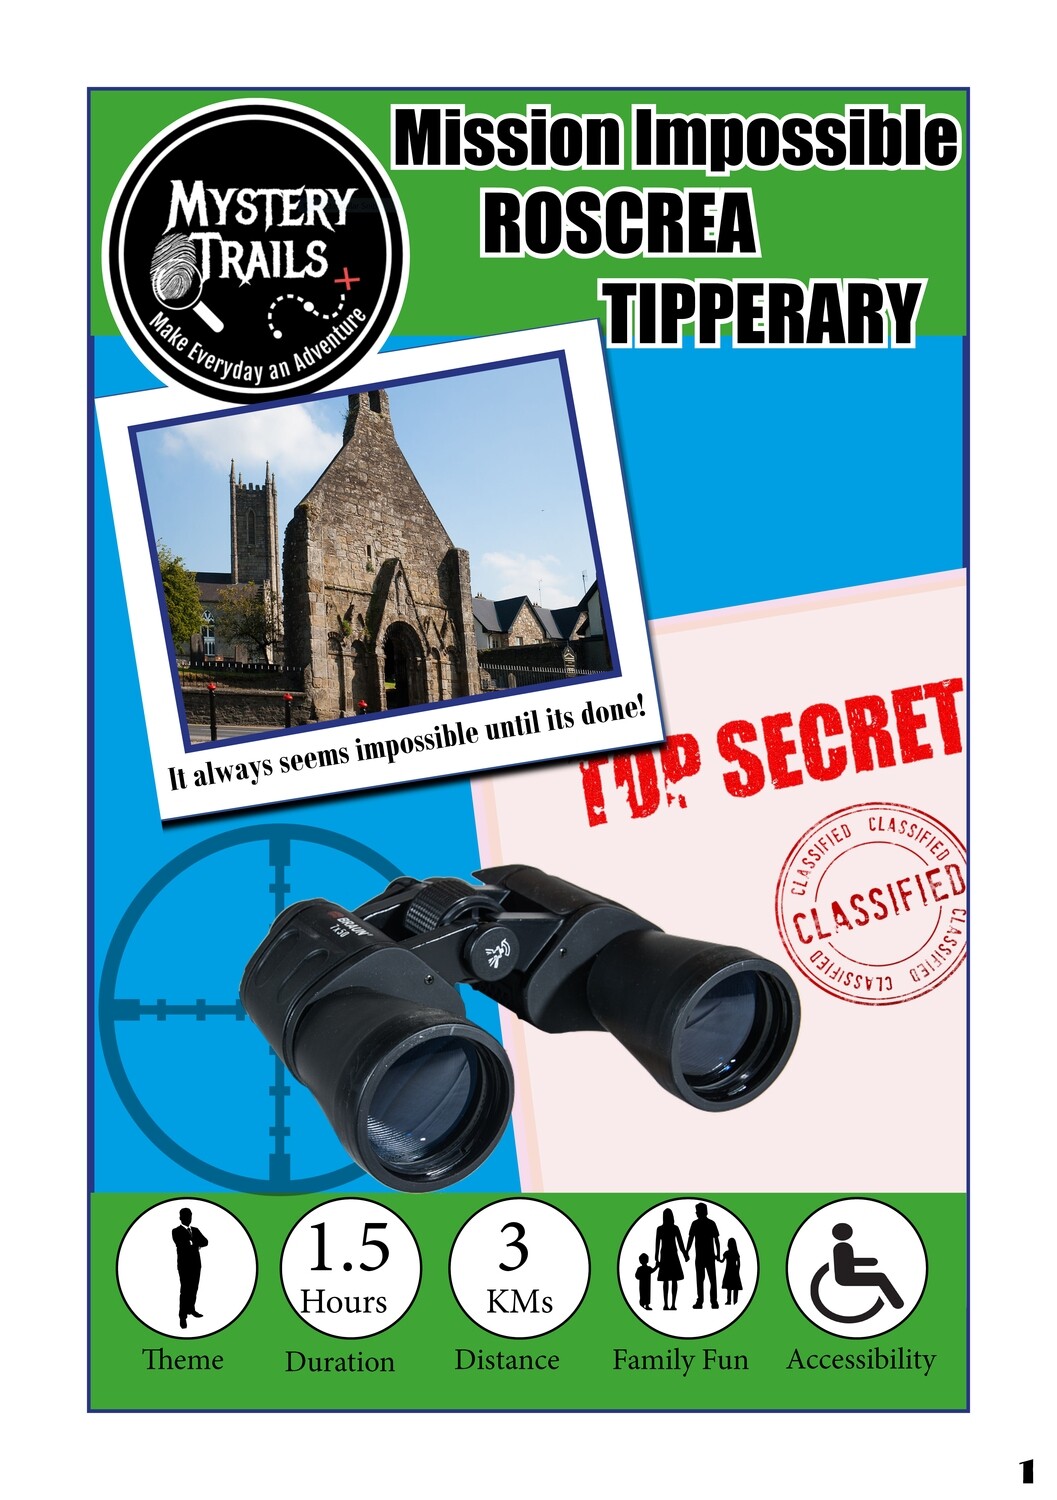 Roscrea- Mission Impossible - Tipperary